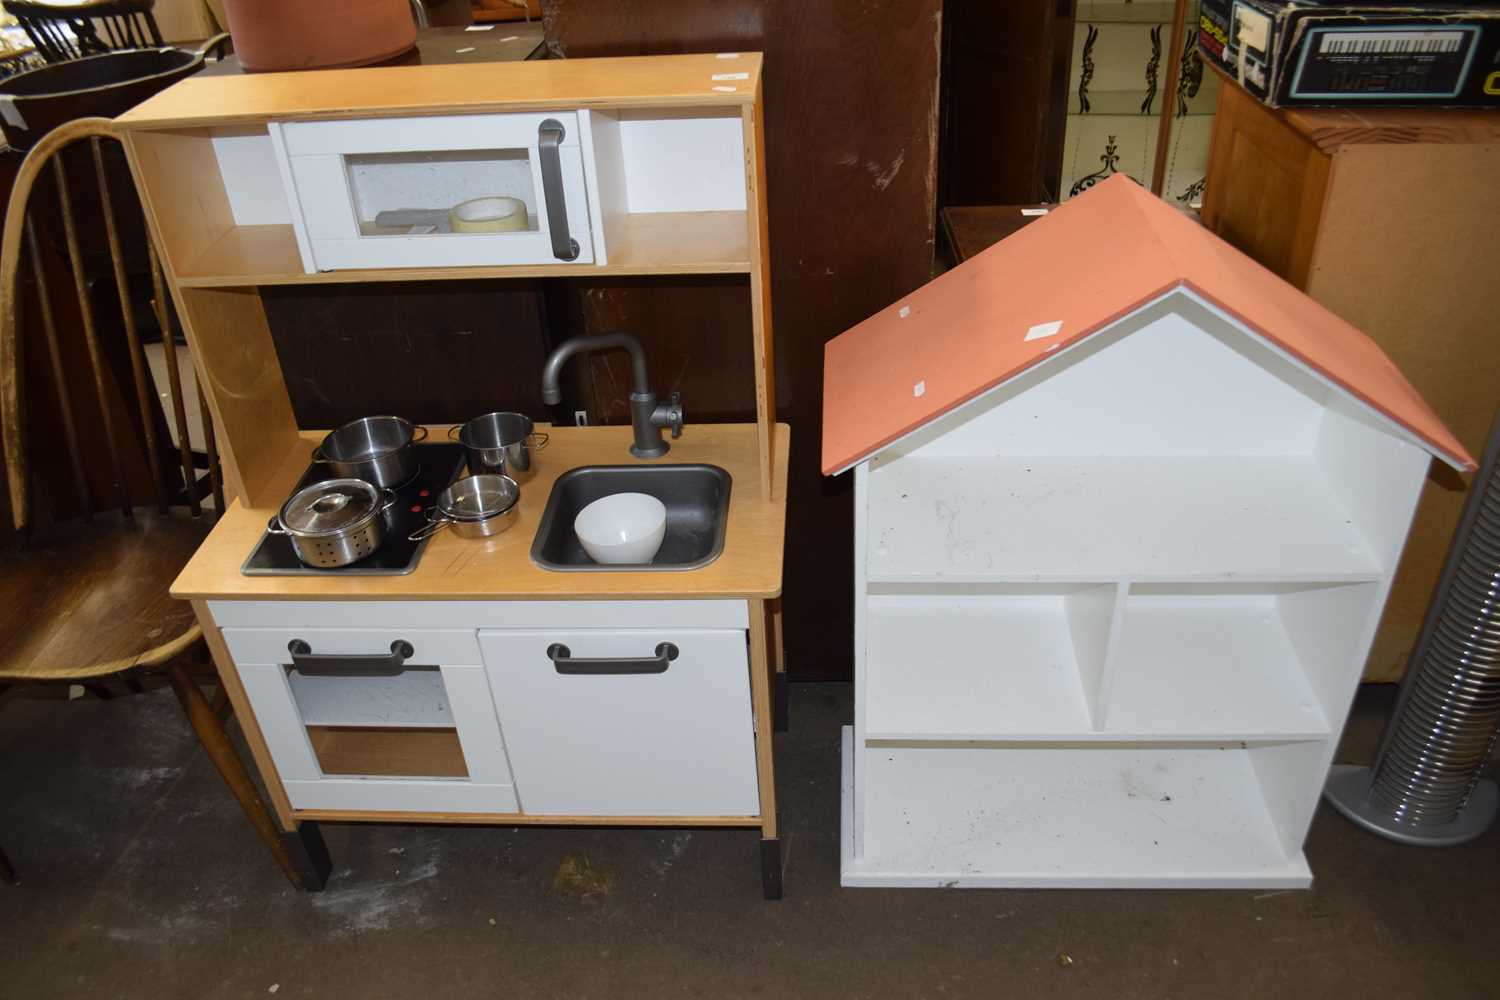 A child's toy kitchen together with a house shaped shelf unit